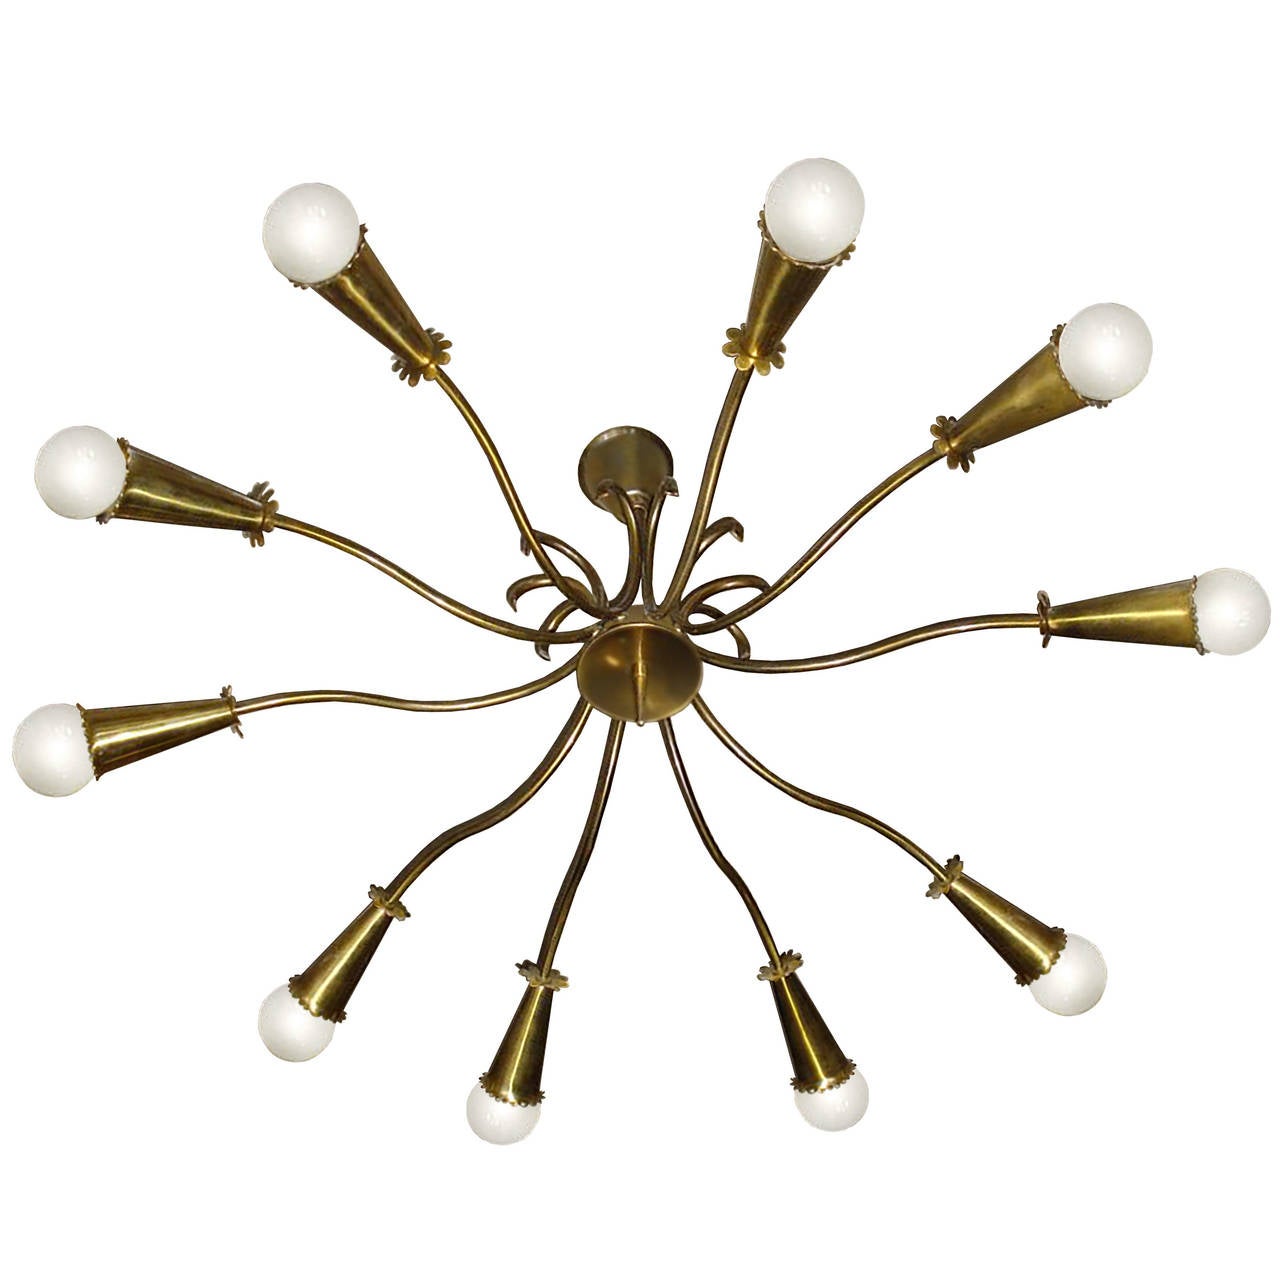 A large brass ceiling fixture with multiple curvaceous arms by Oscar Torlasco, Italian, circa 1950s.